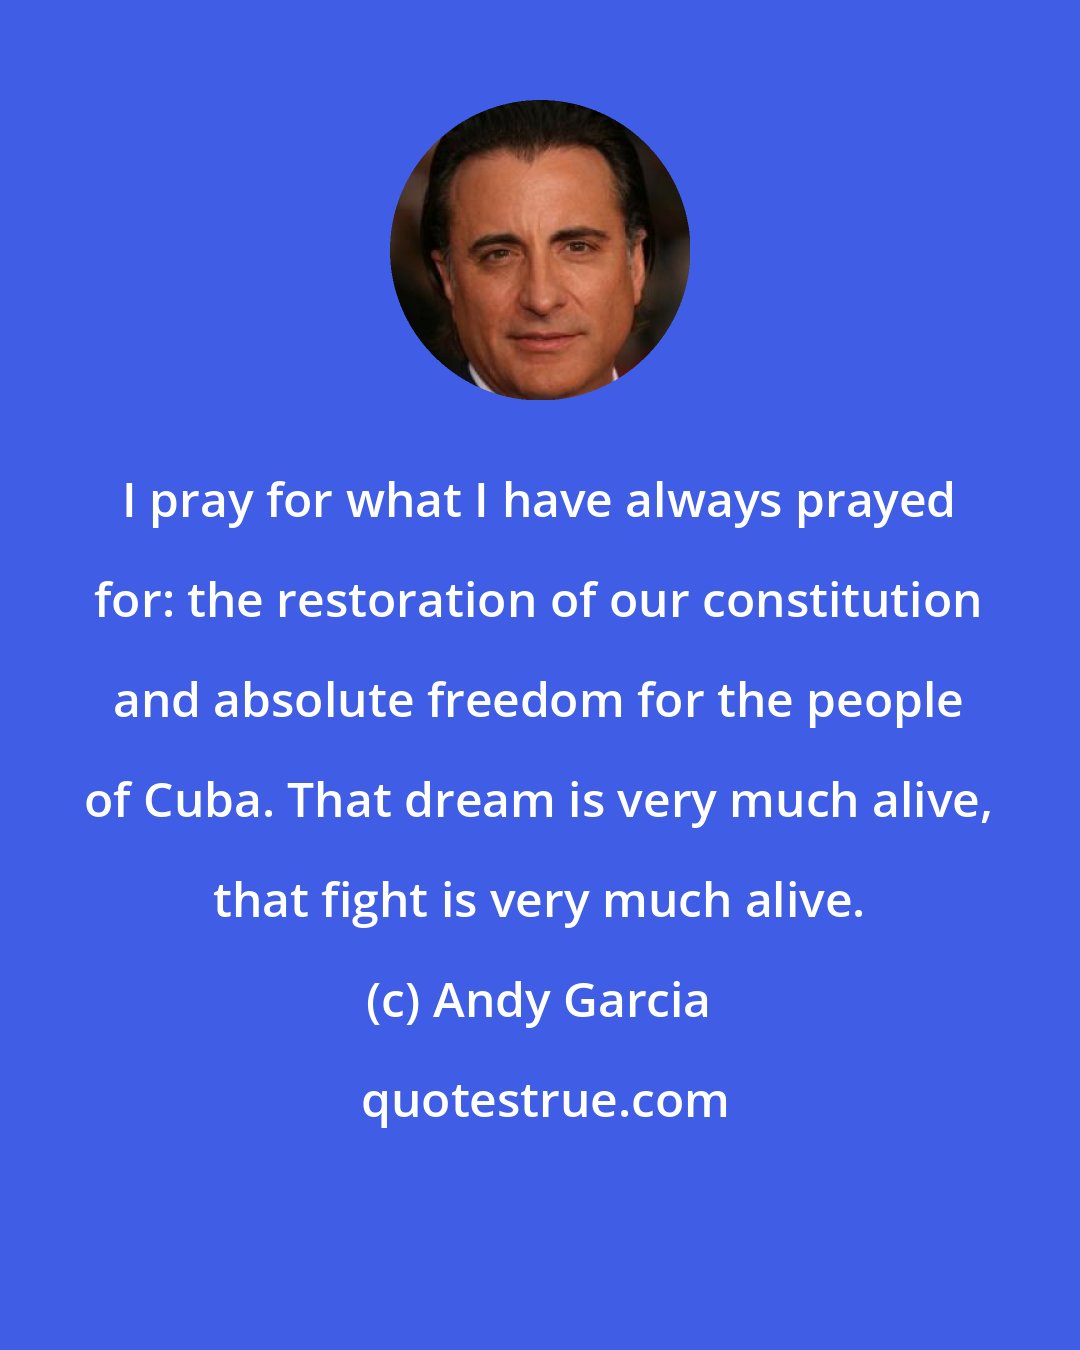 Andy Garcia: I pray for what I have always prayed for: the restoration of our constitution and absolute freedom for the people of Cuba. That dream is very much alive, that fight is very much alive.